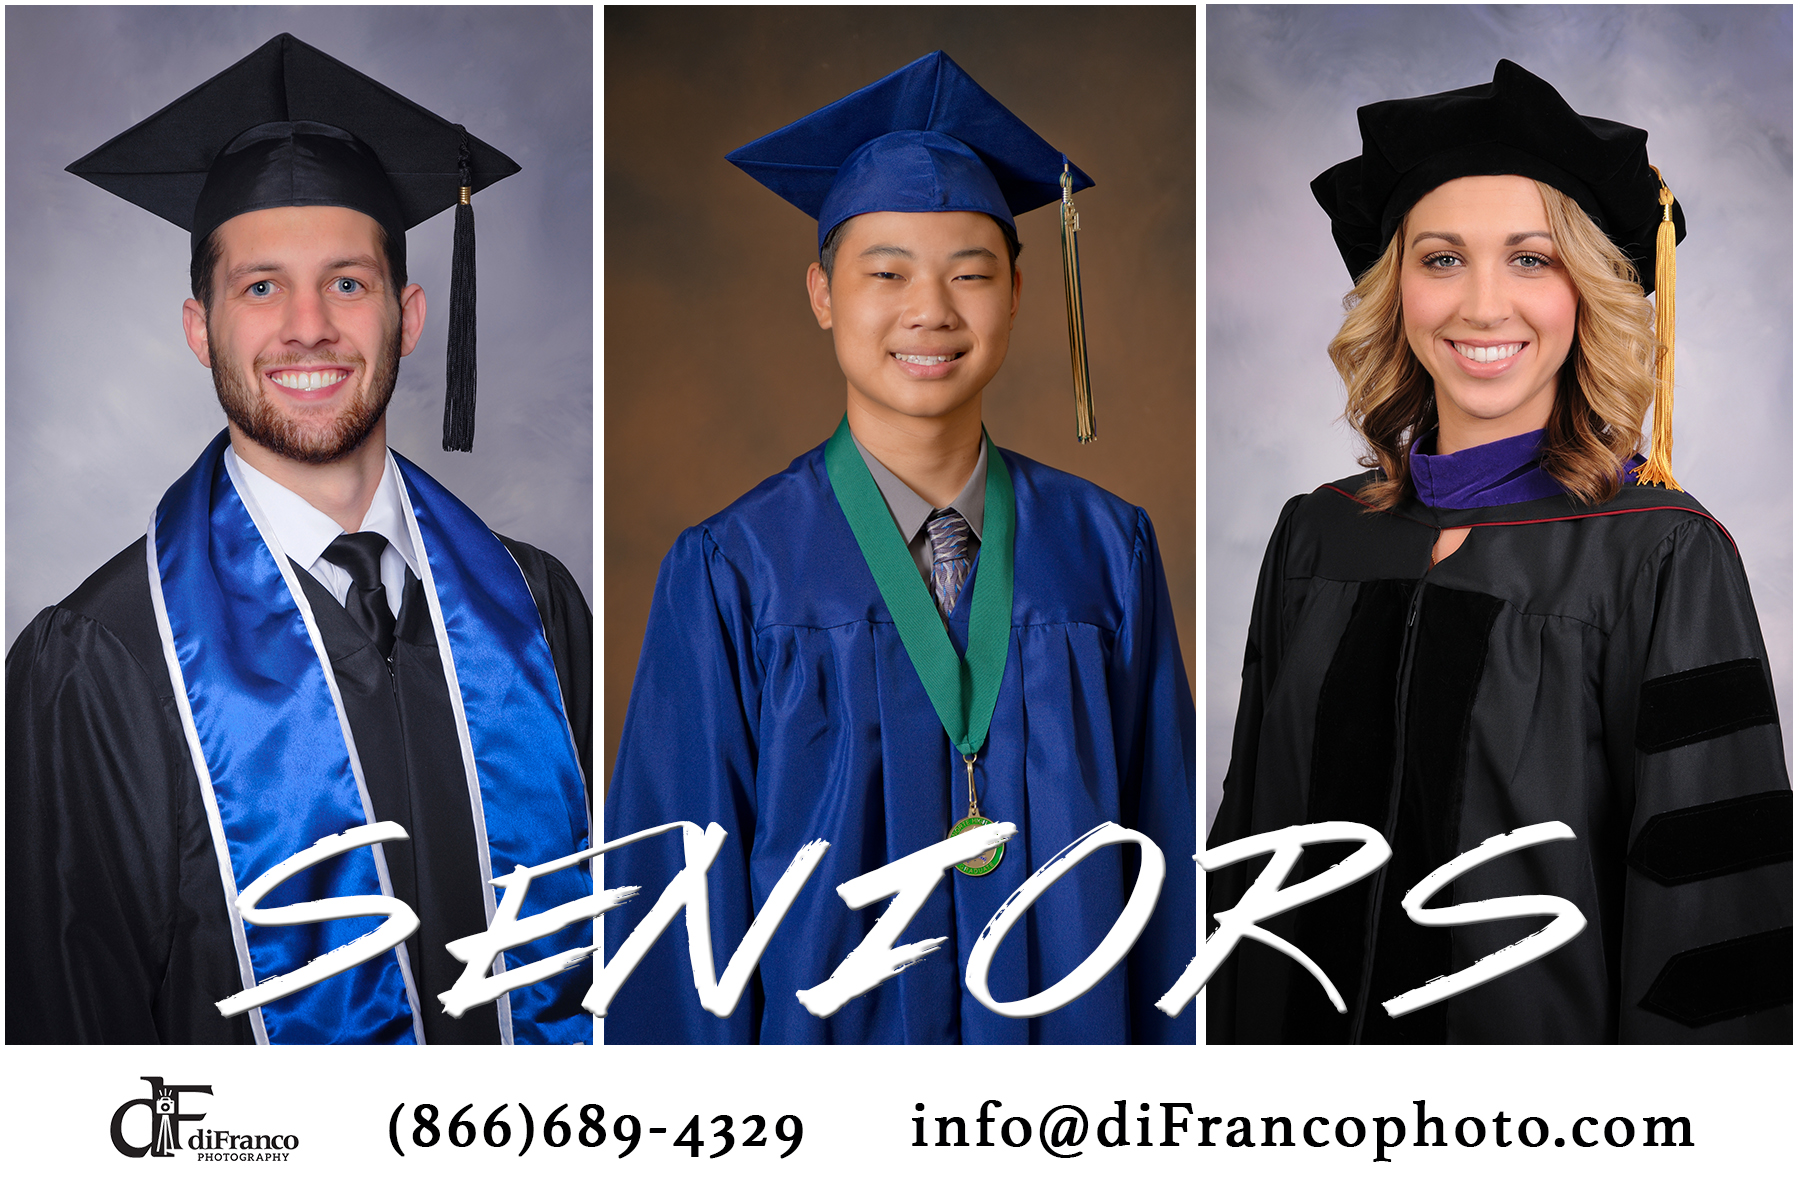 Pictures of graduates in their cap and gown taken by diFranco Photography during Grad Fair.